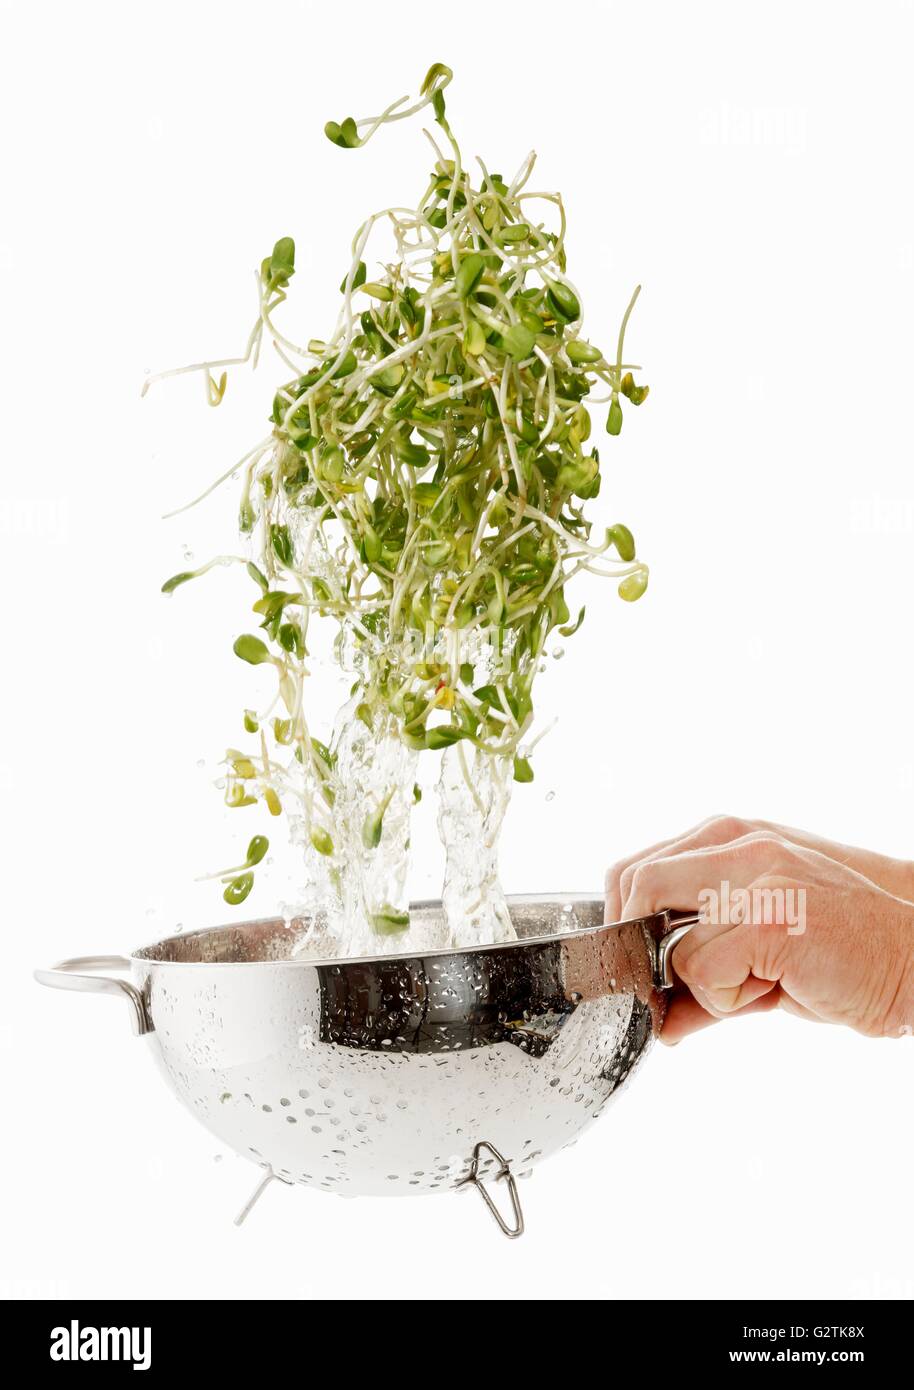 Sunflower sprouts being washed Stock Photo